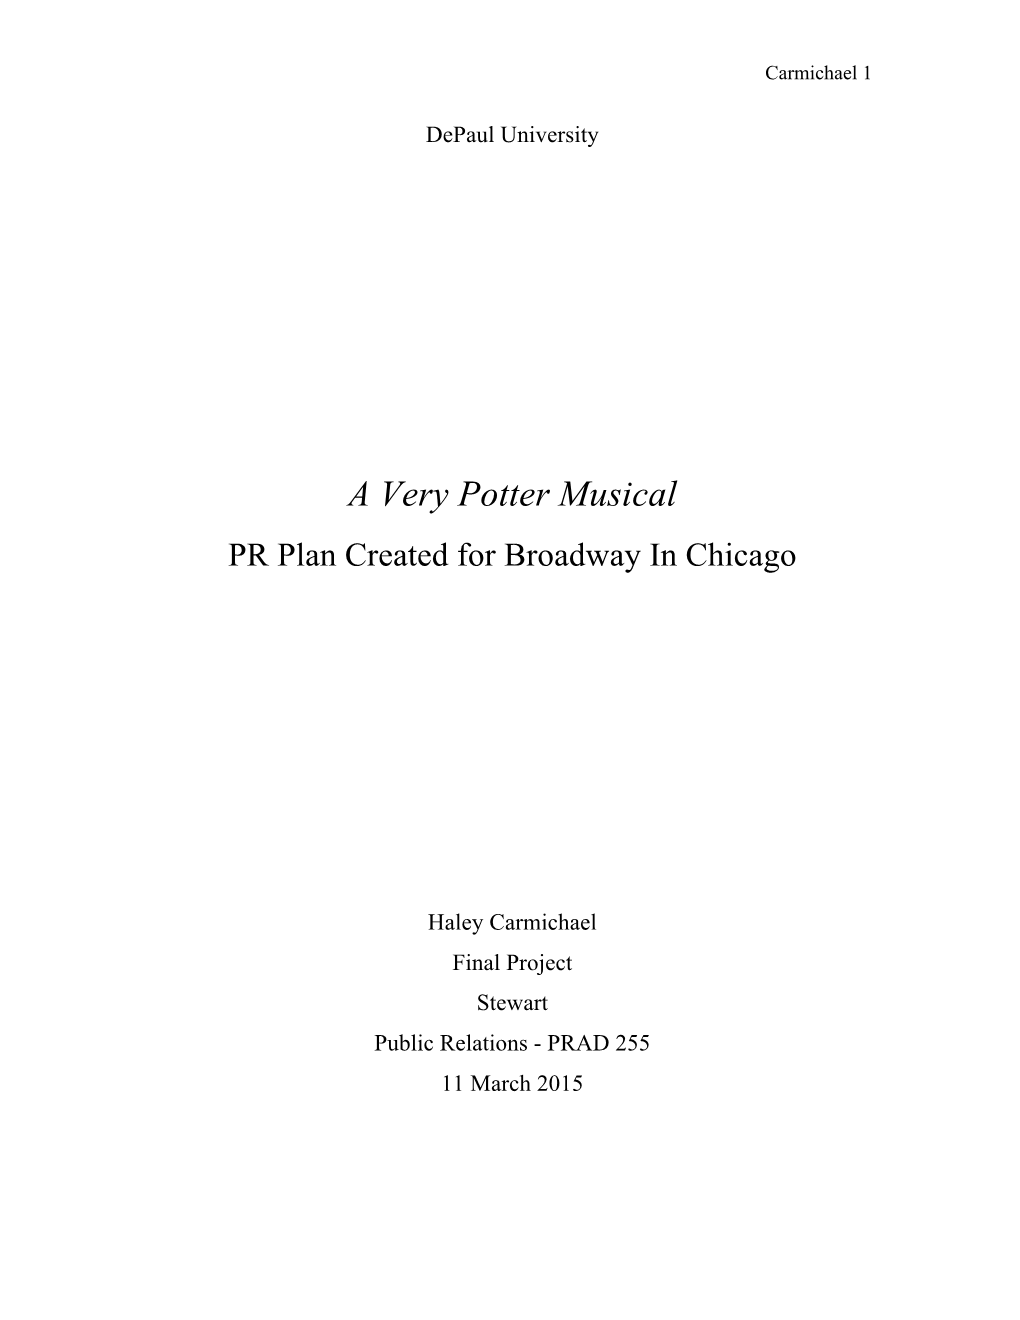 A Very Potter Musical PR Plan Created for Broadway in Chicago